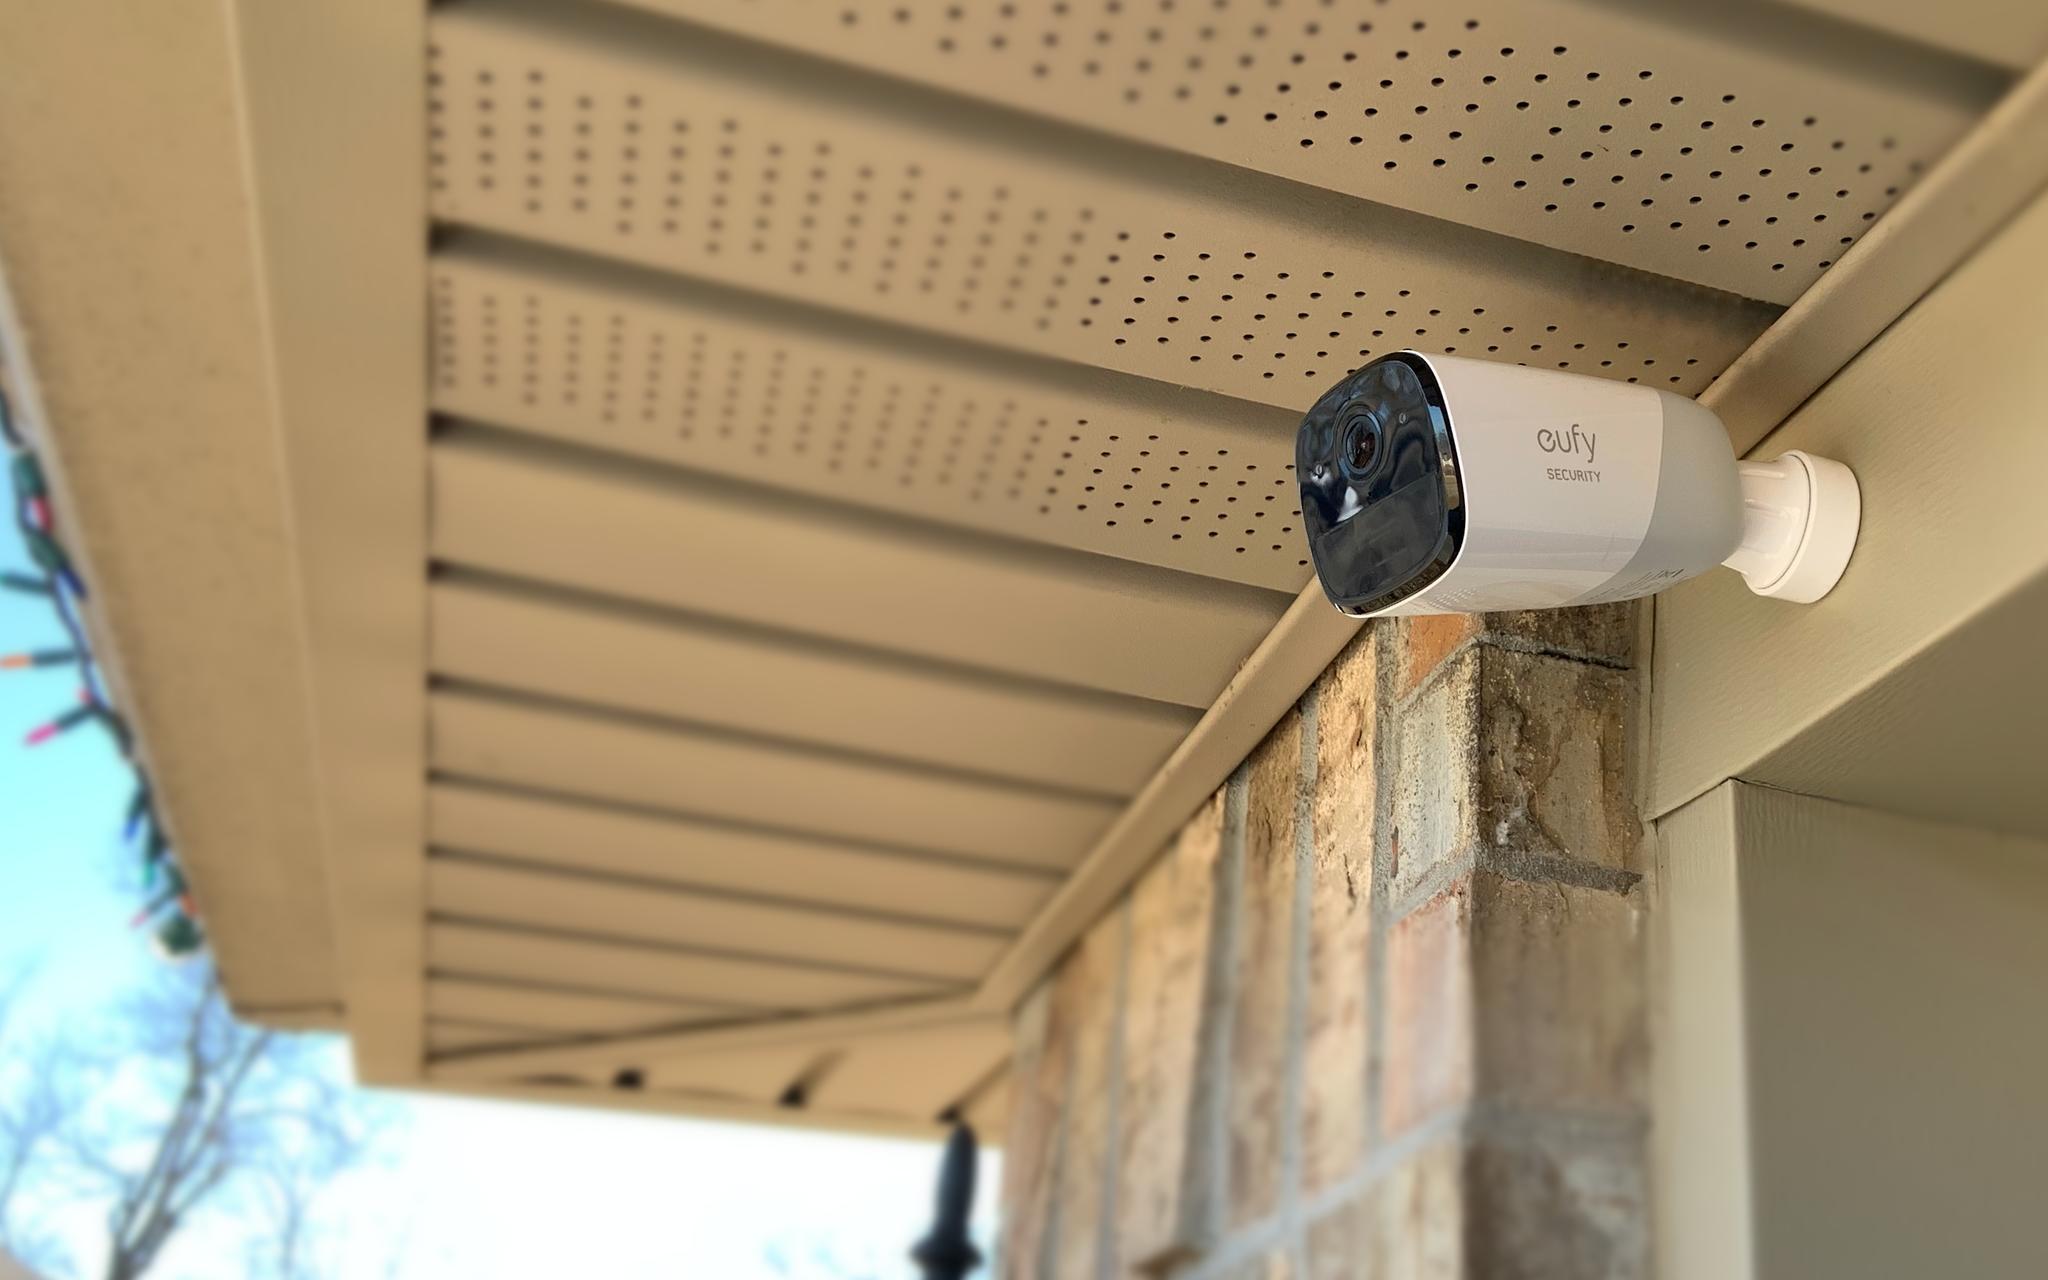 eufyCam 2 installed on a home outdoors